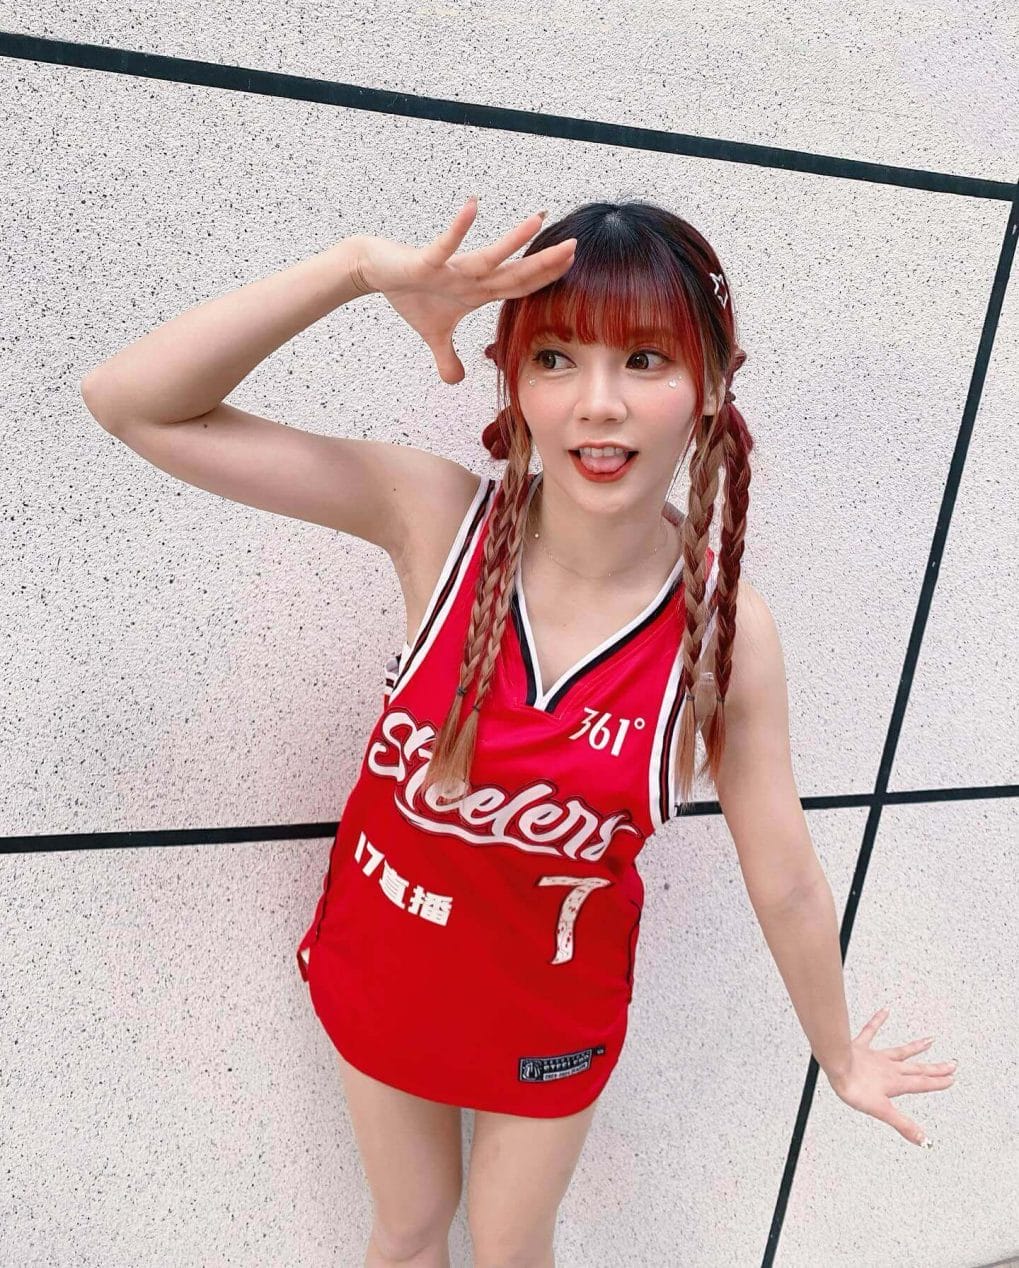 Red-haired cheerleader with playful braids and straight bangs